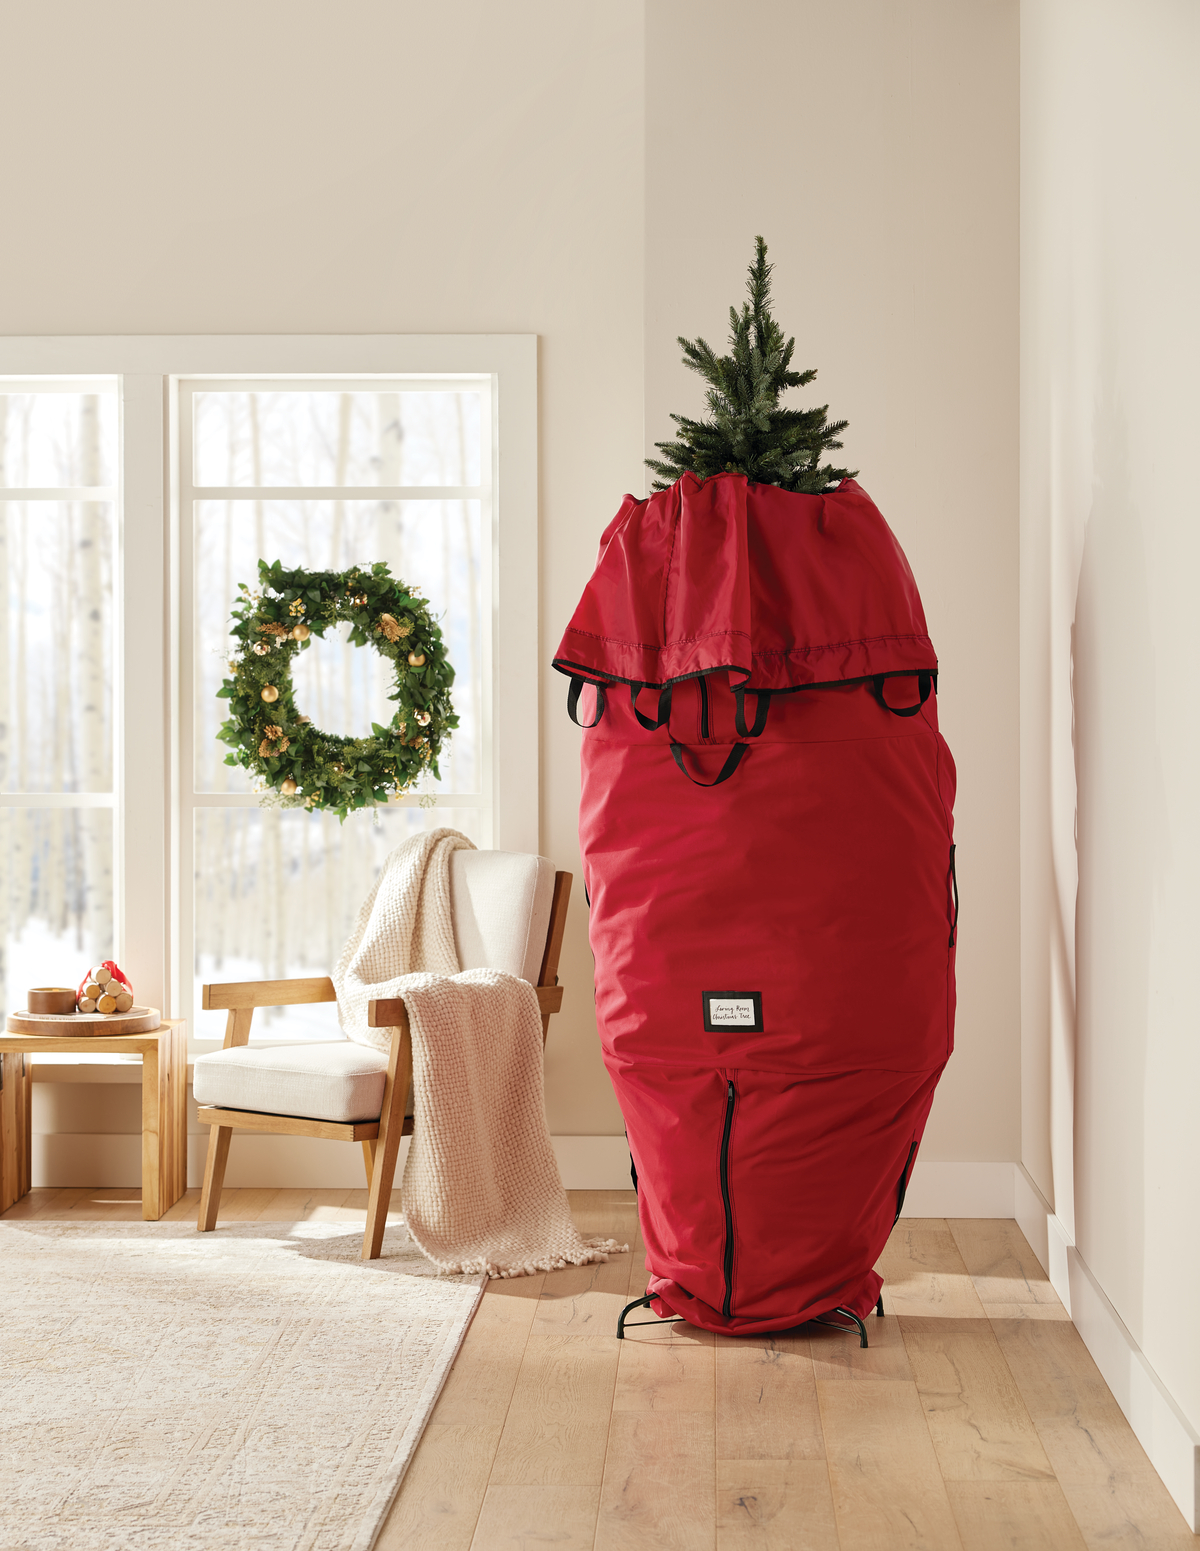 https://www.containerstore.com/catalogimages/468708/10090052_upright_christmas_tree_stor.jpg